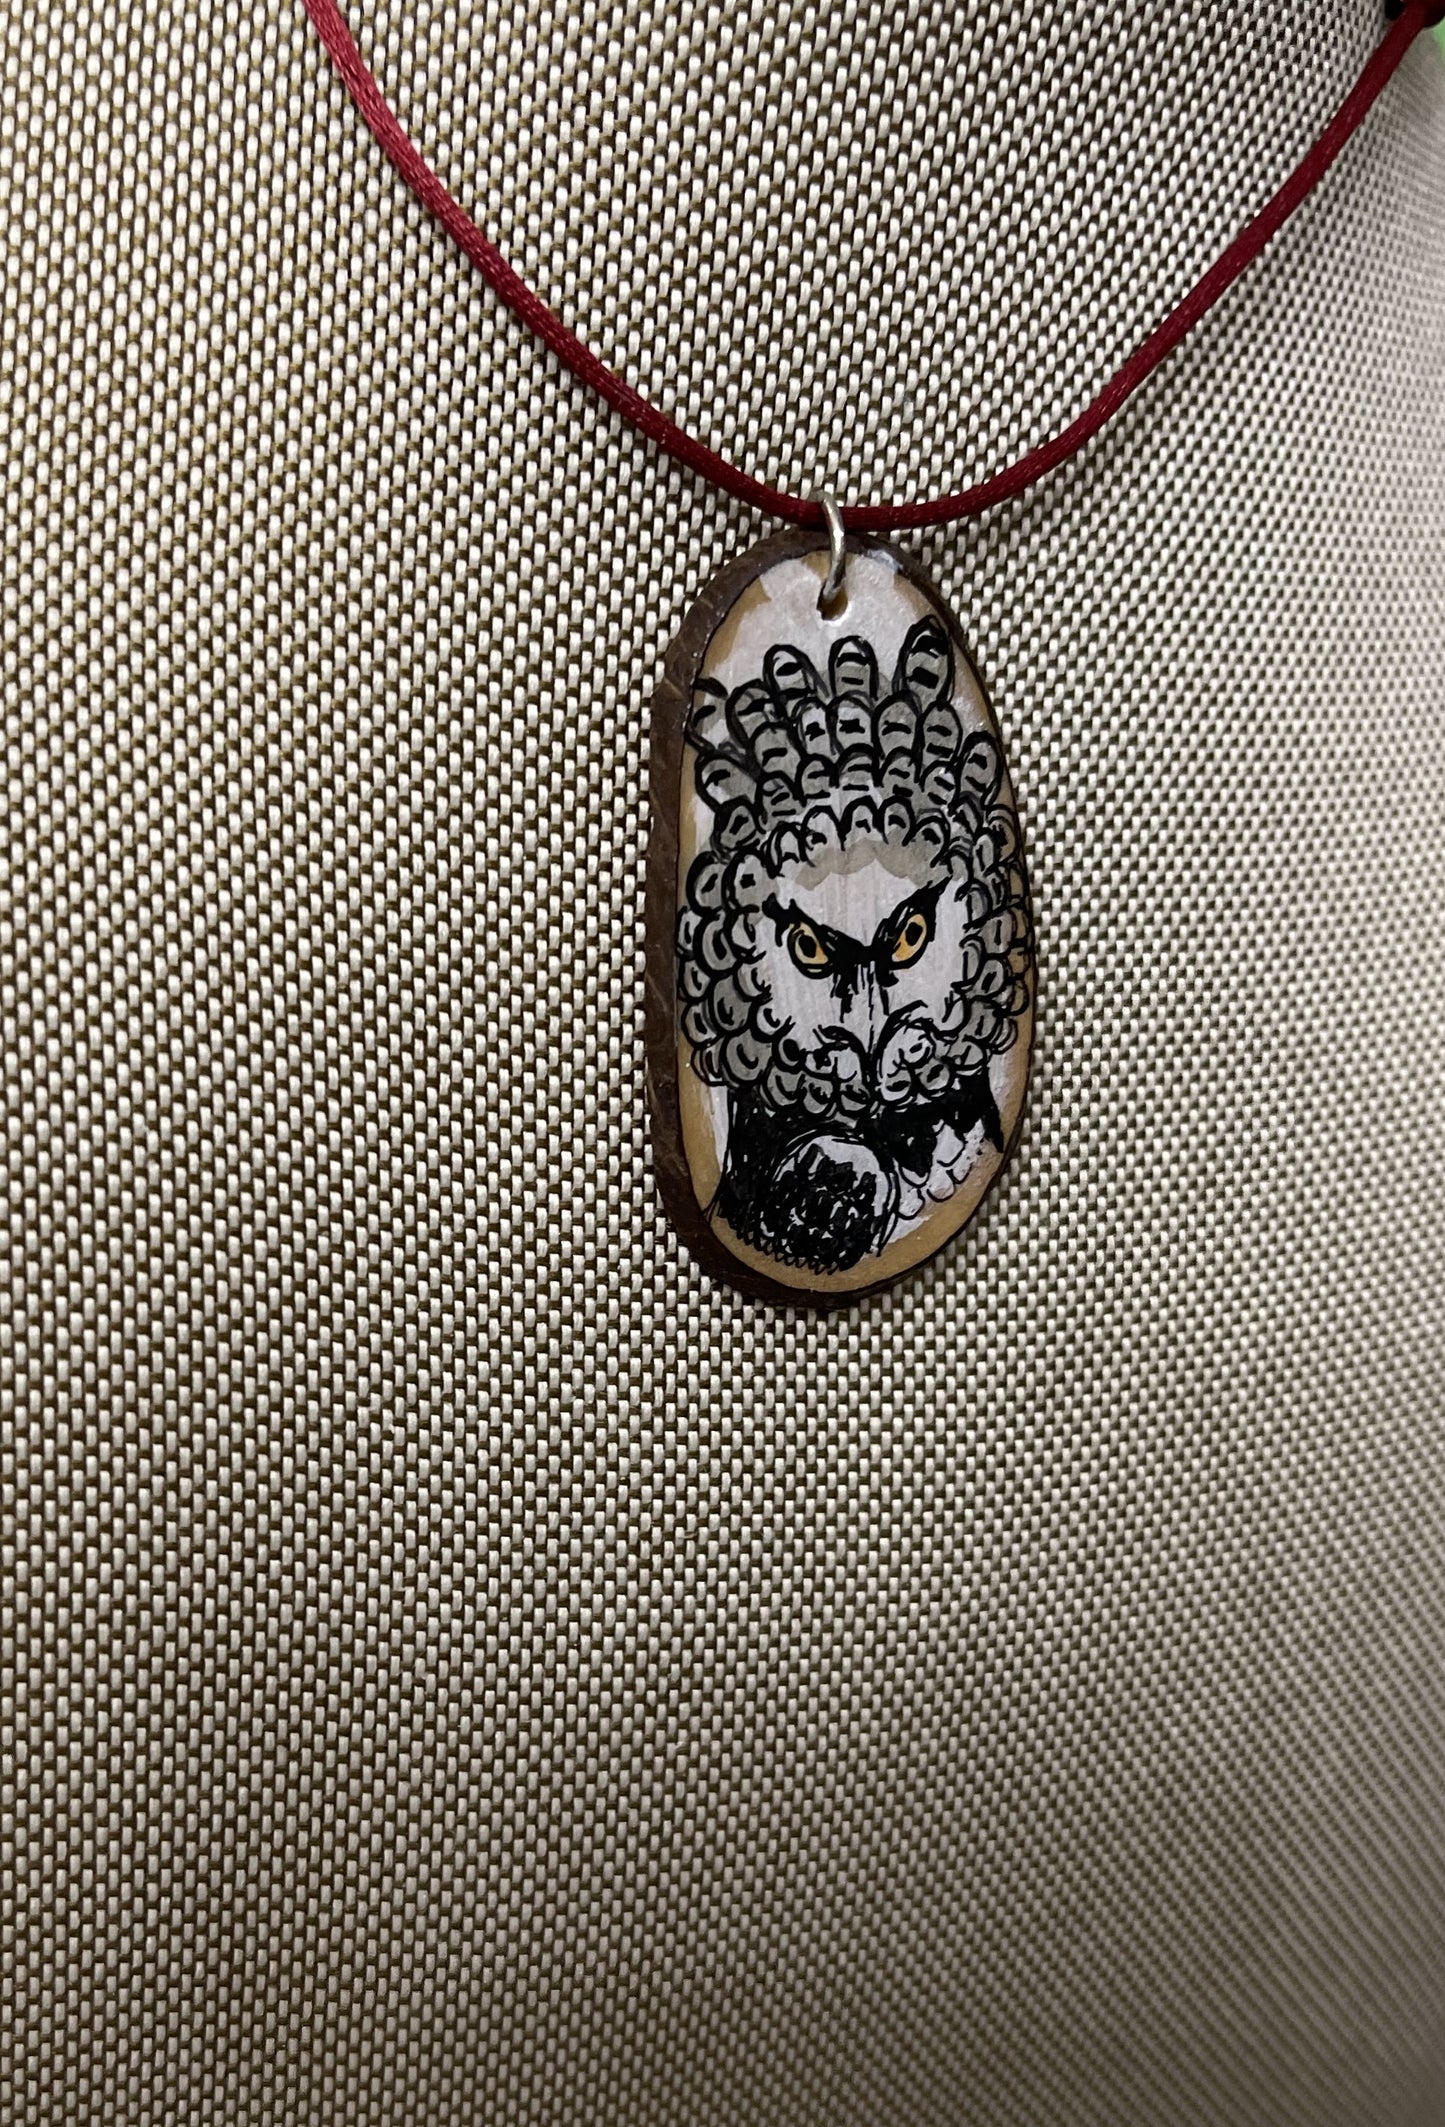 Etched Tagua Slice Harpy Eagle Carved Necklace Pendant Panama